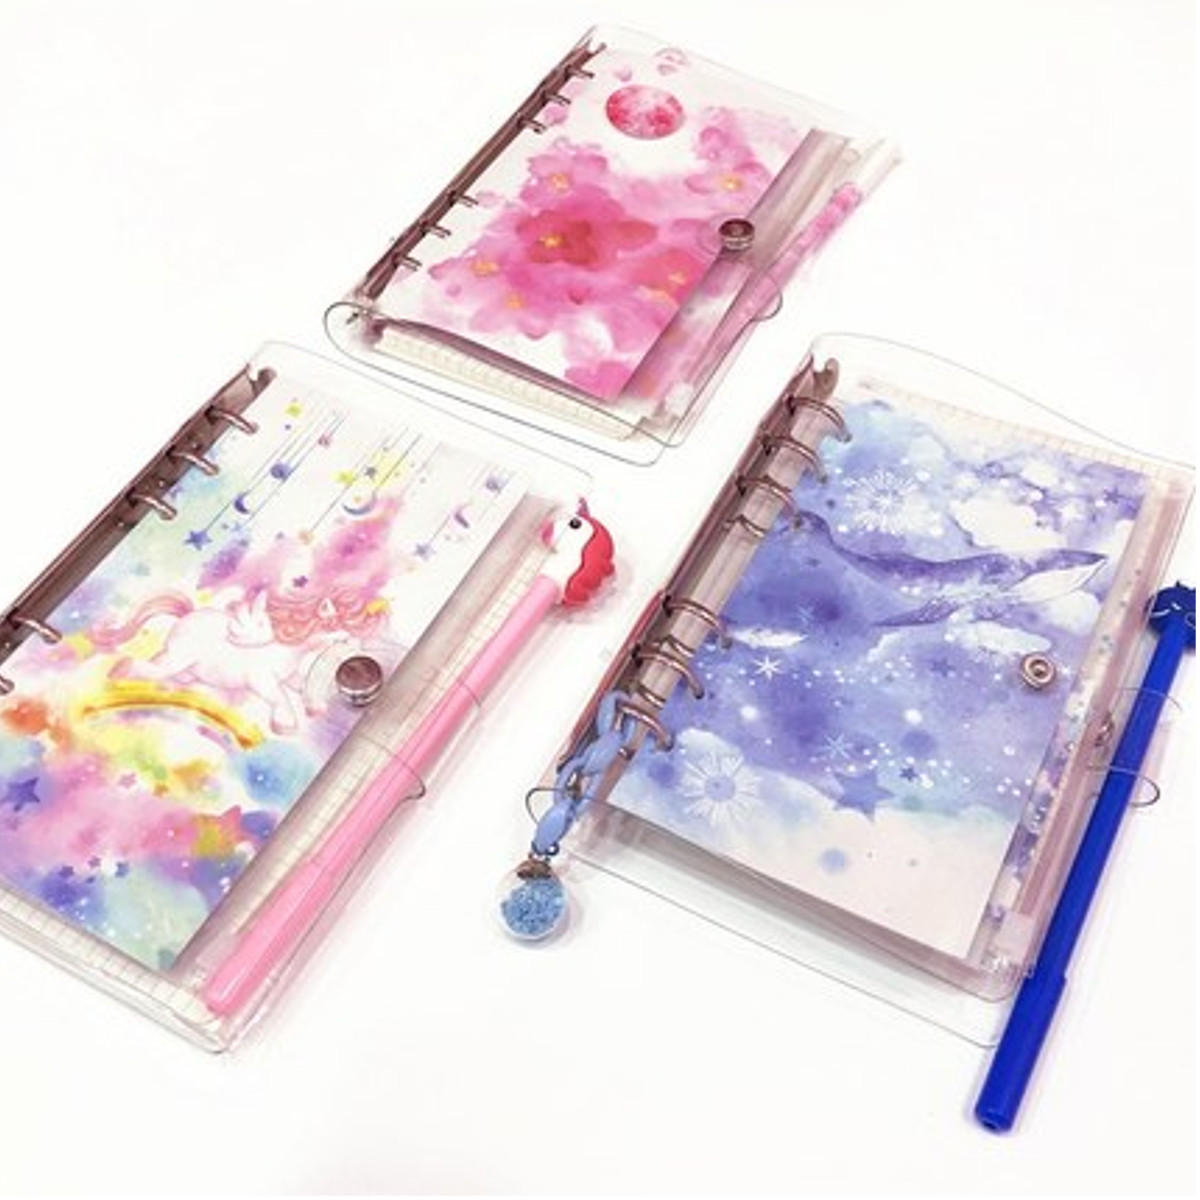 

Kawaii Cute A5/A6 Notebook Diary Ins Girl Loose-leaf Unicorn Ocean Cherry blossoms Series Notepad Planner Spiral Travel